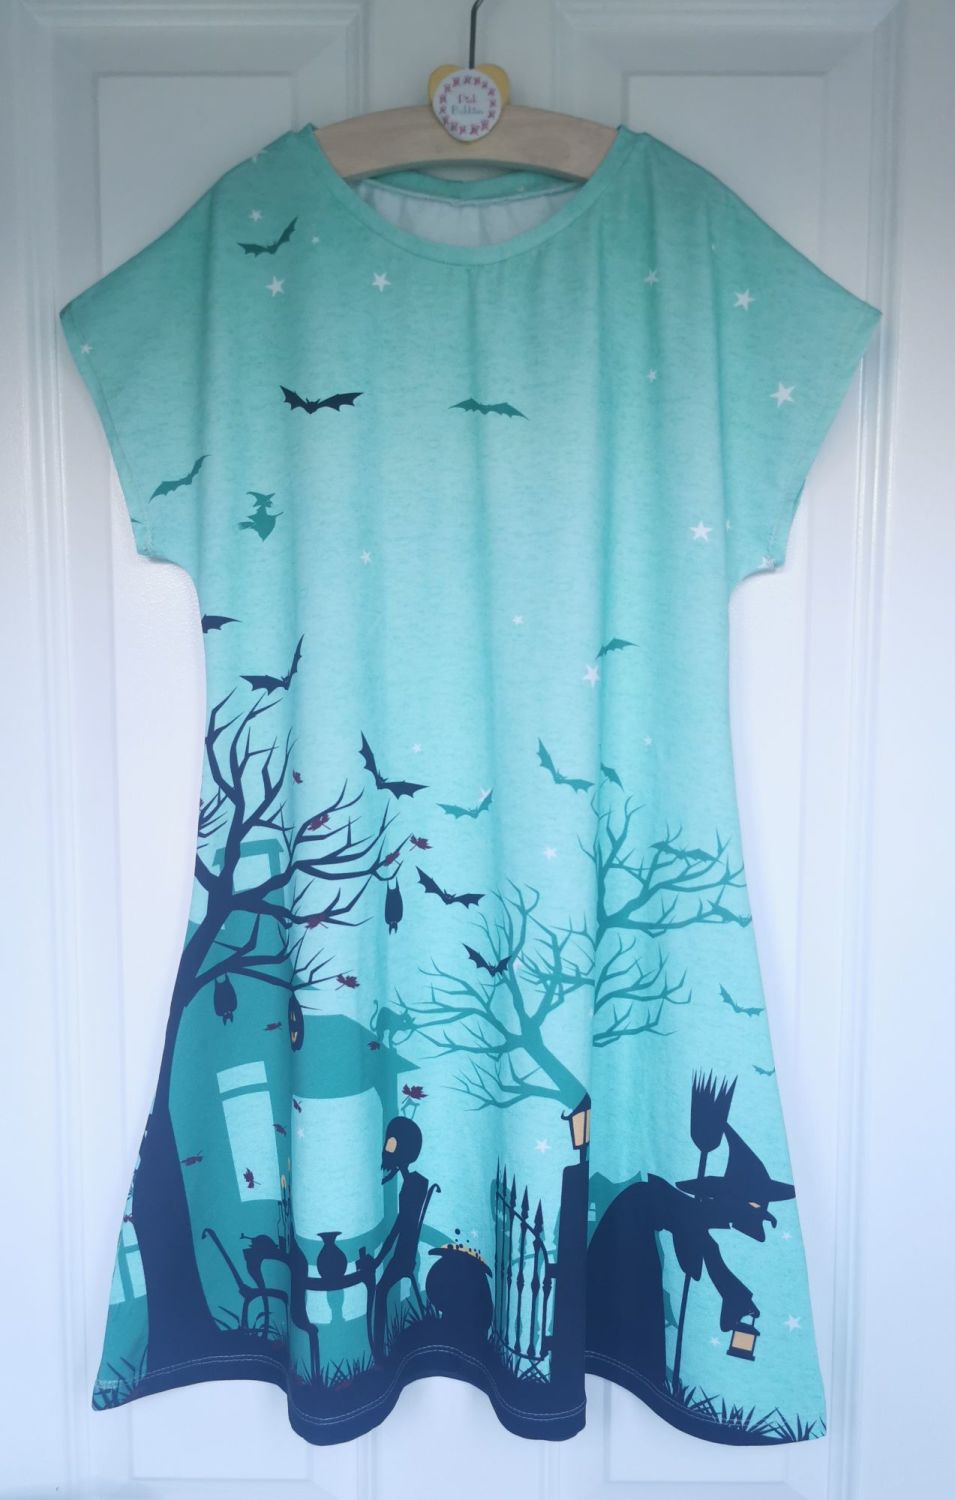 Spooky comfy dress [LAST One] 9-10yrs - in stock